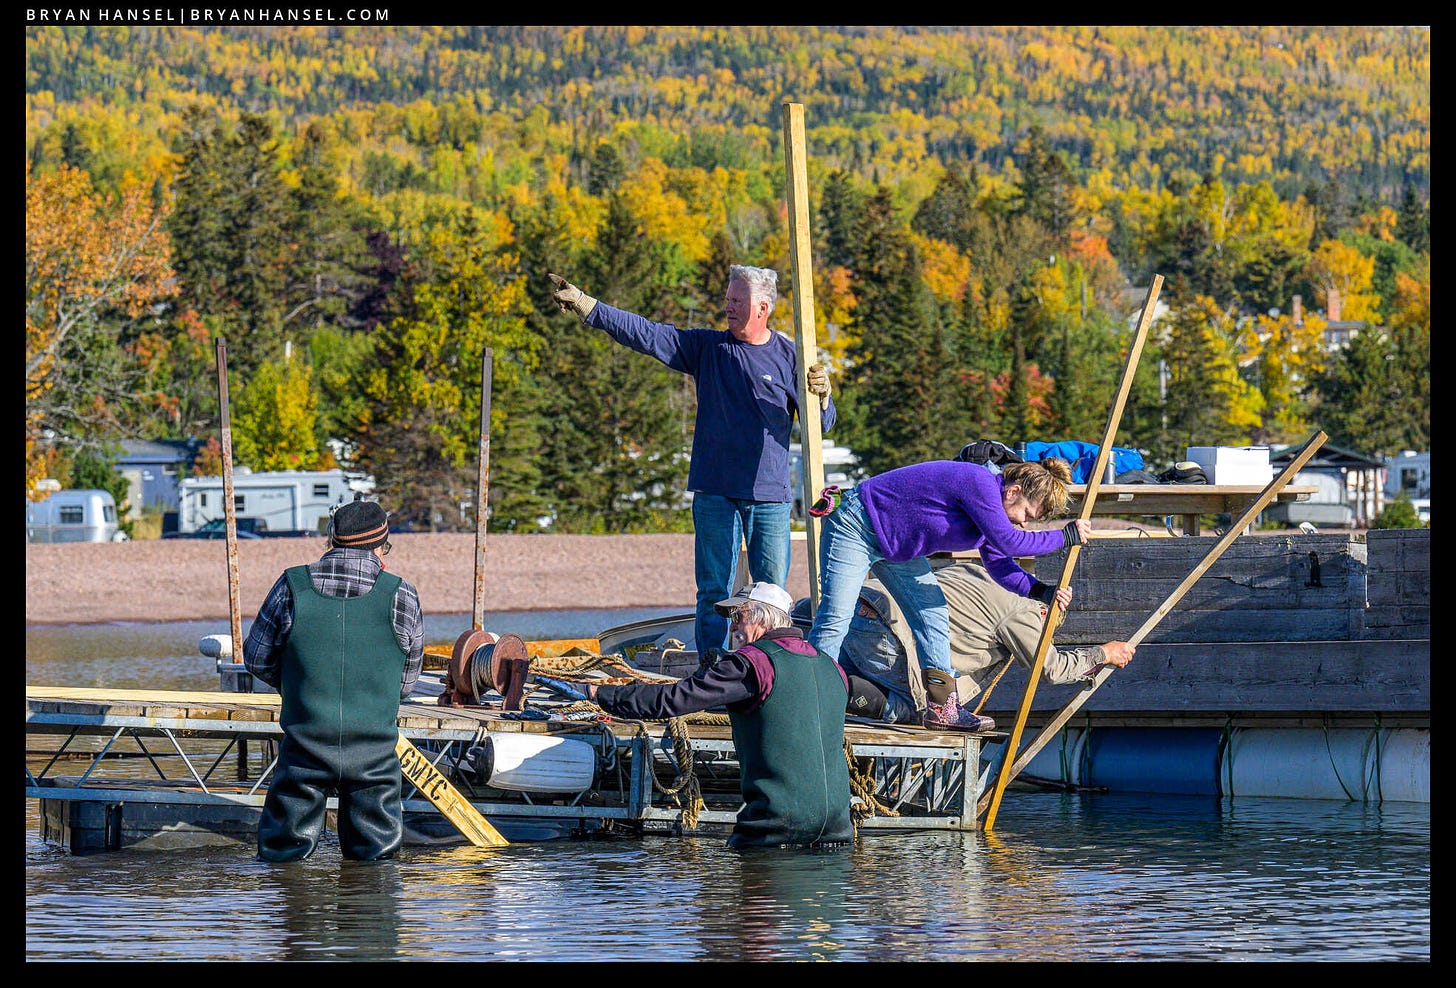 Two people pushing a dock in the water. Three people stading on the dock and two pushing something underwater with sticks. There's a third man pointing towards shore. Fall colors in the background.